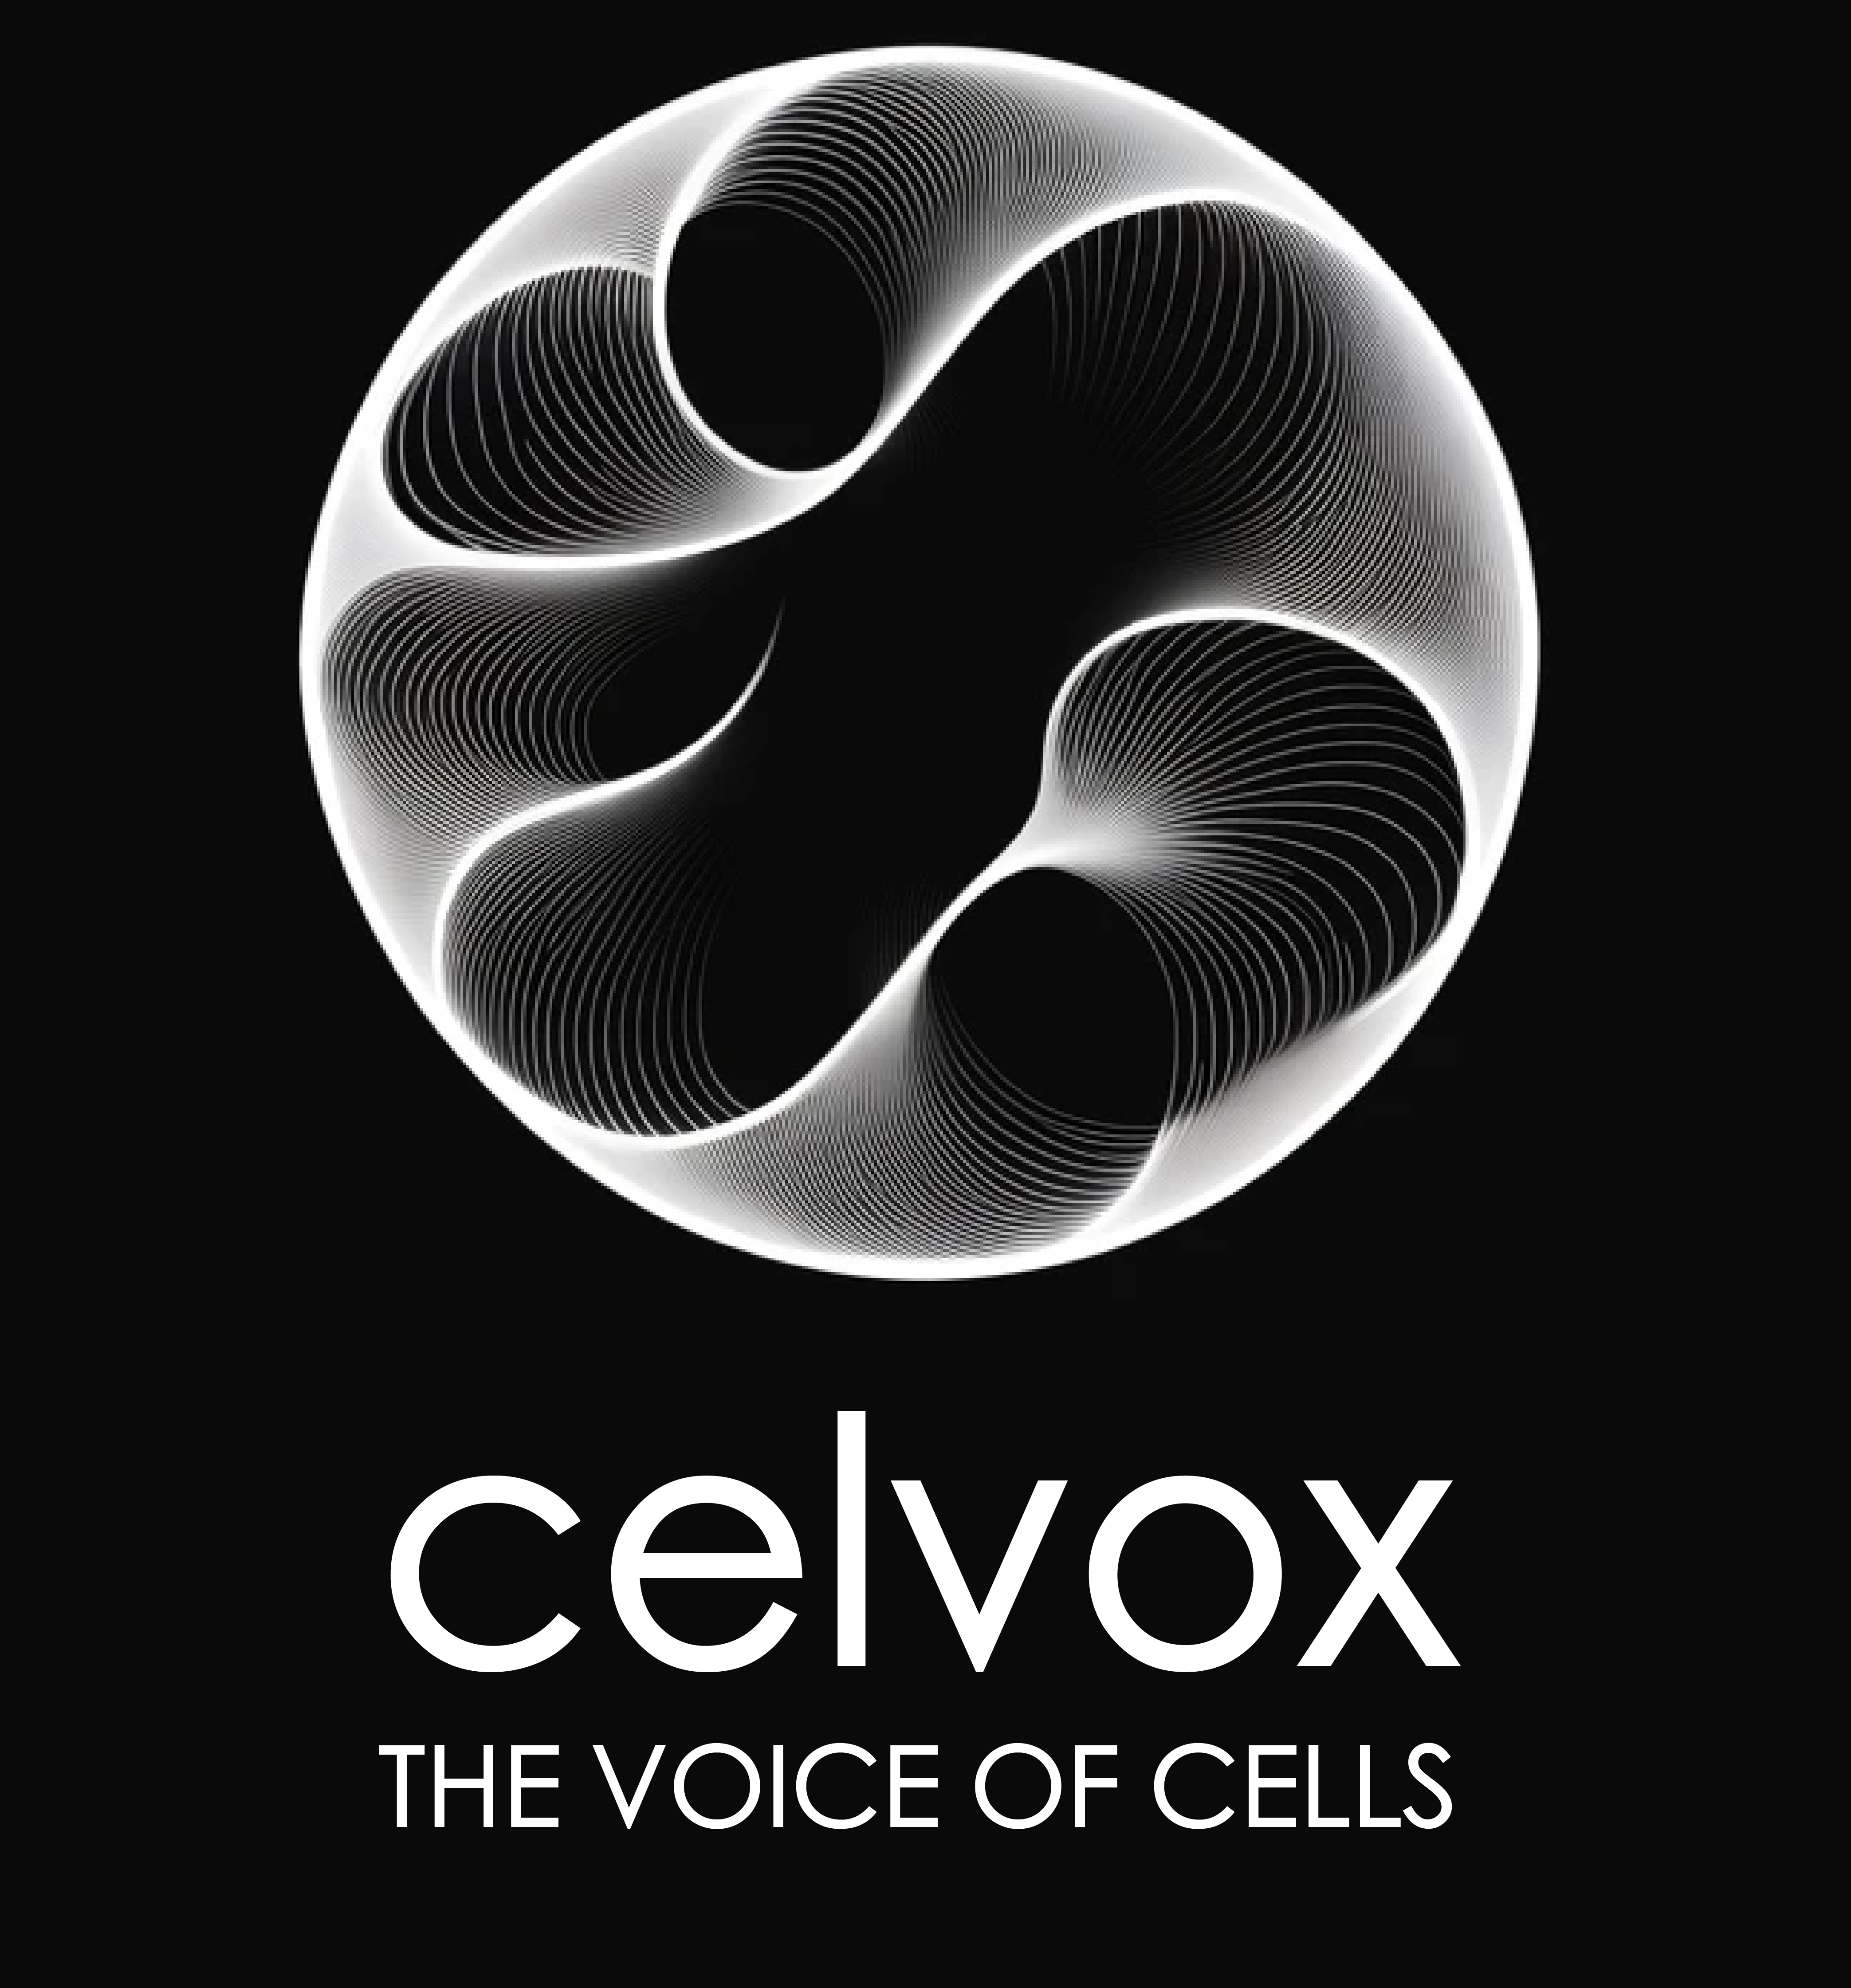 Celvox - The Voice of Cells